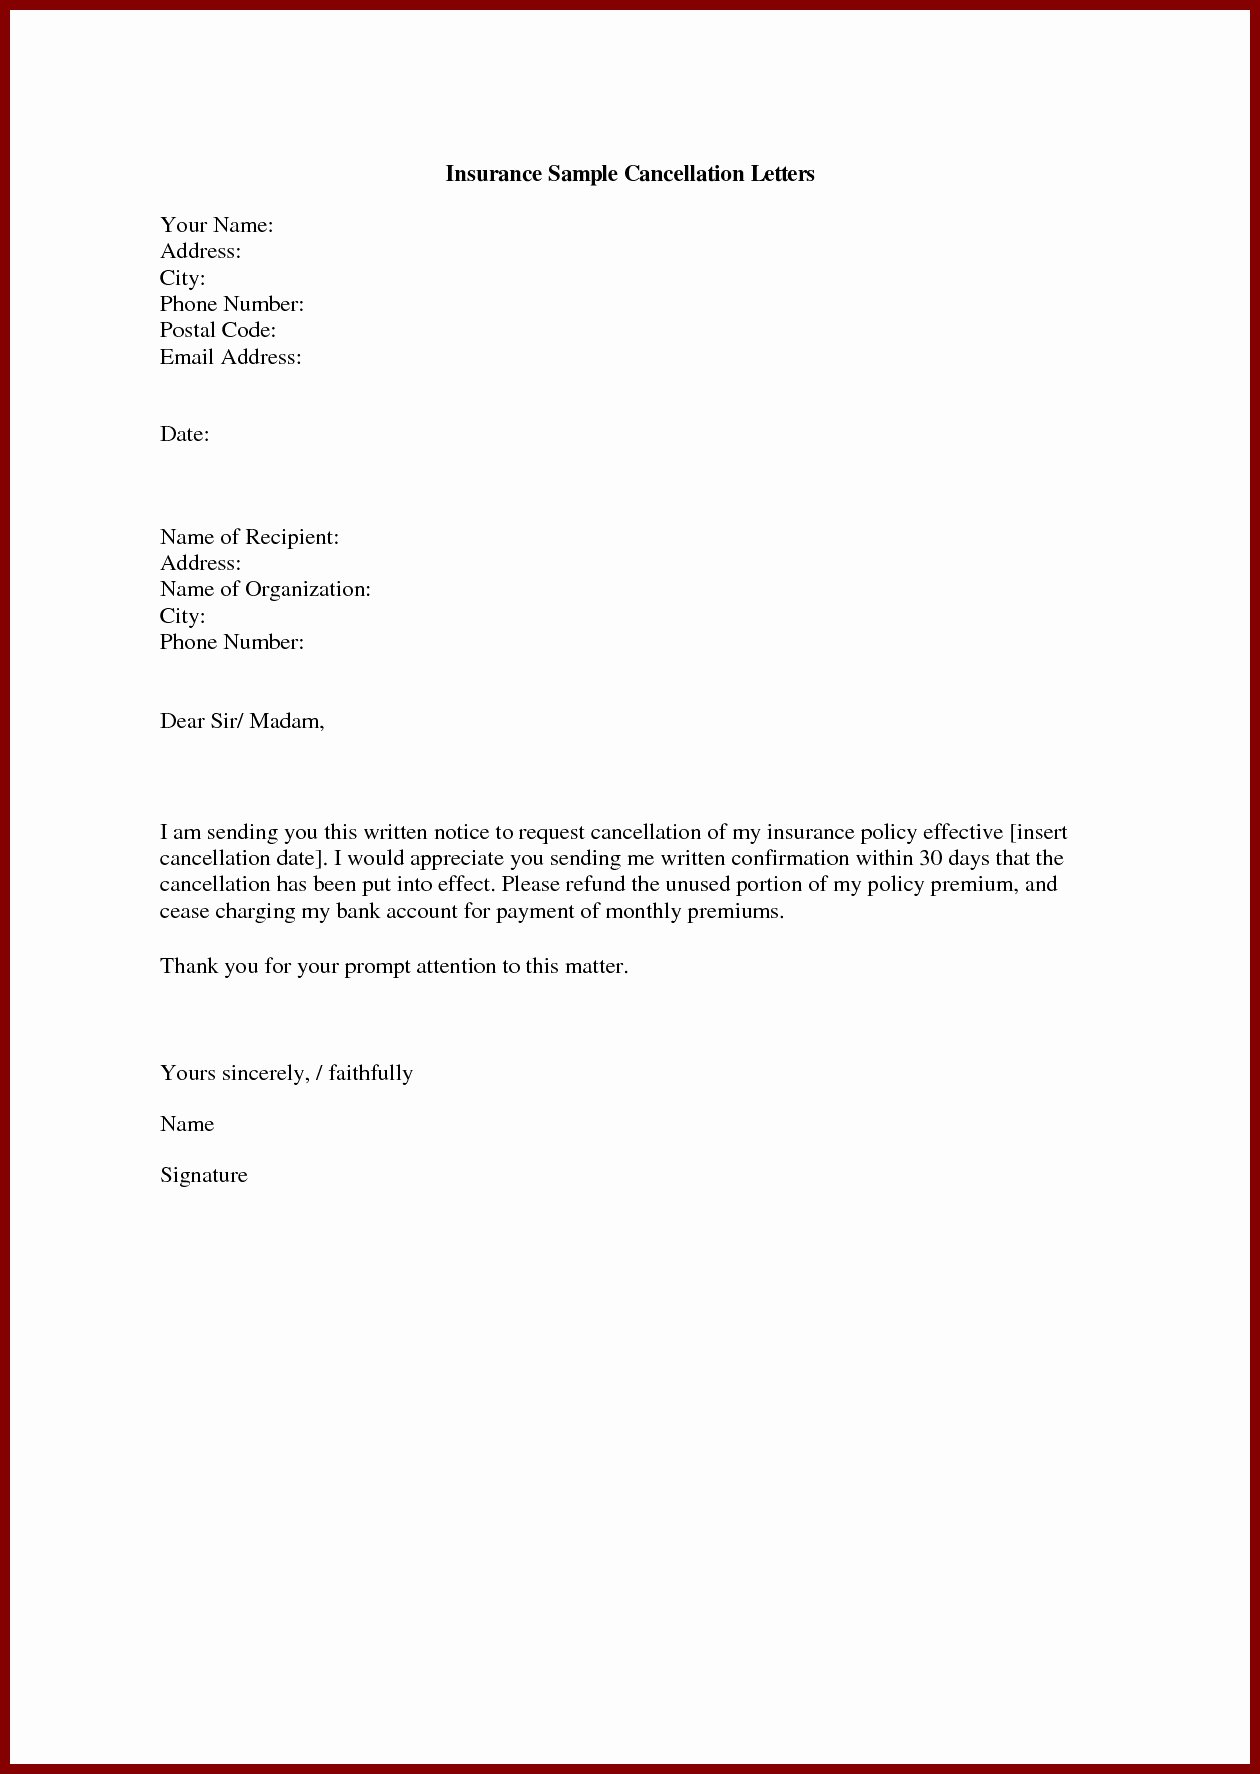 Policy Letter Template New Insurance Cancellation Letter Template Sample